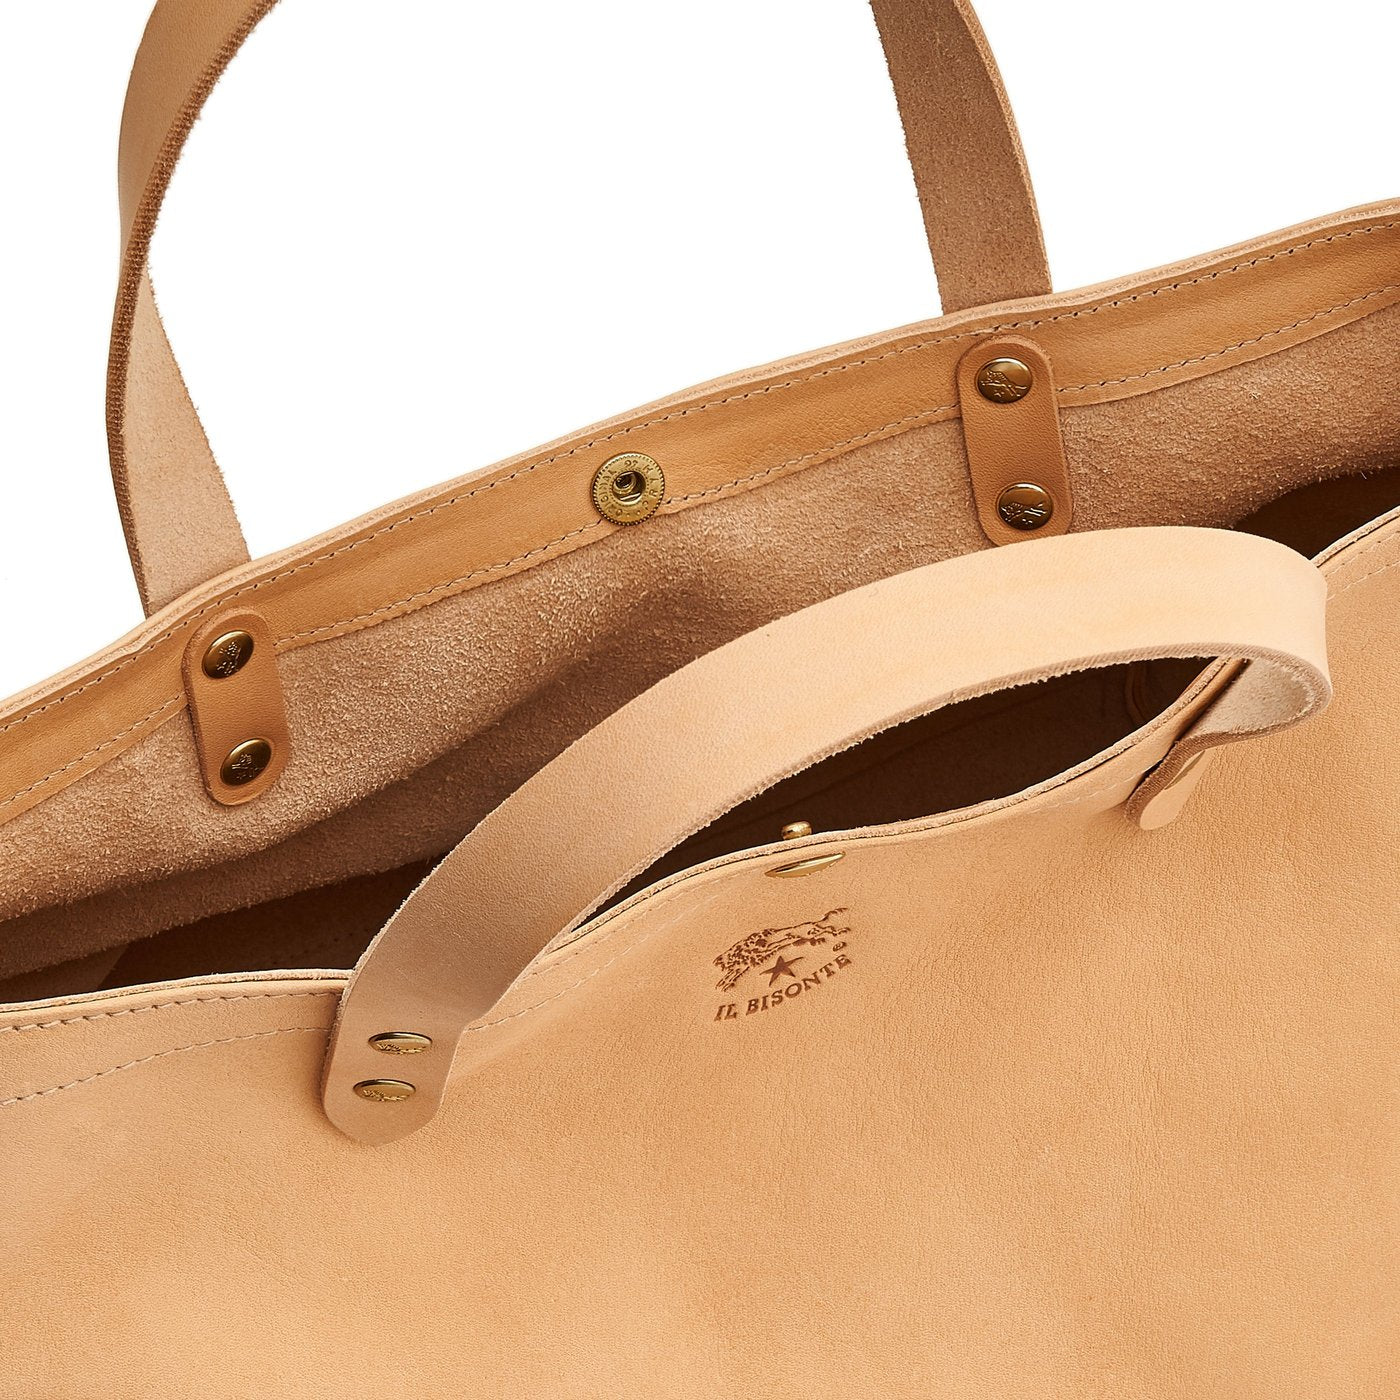 Cassiopea | Women's handbag in leather color natural